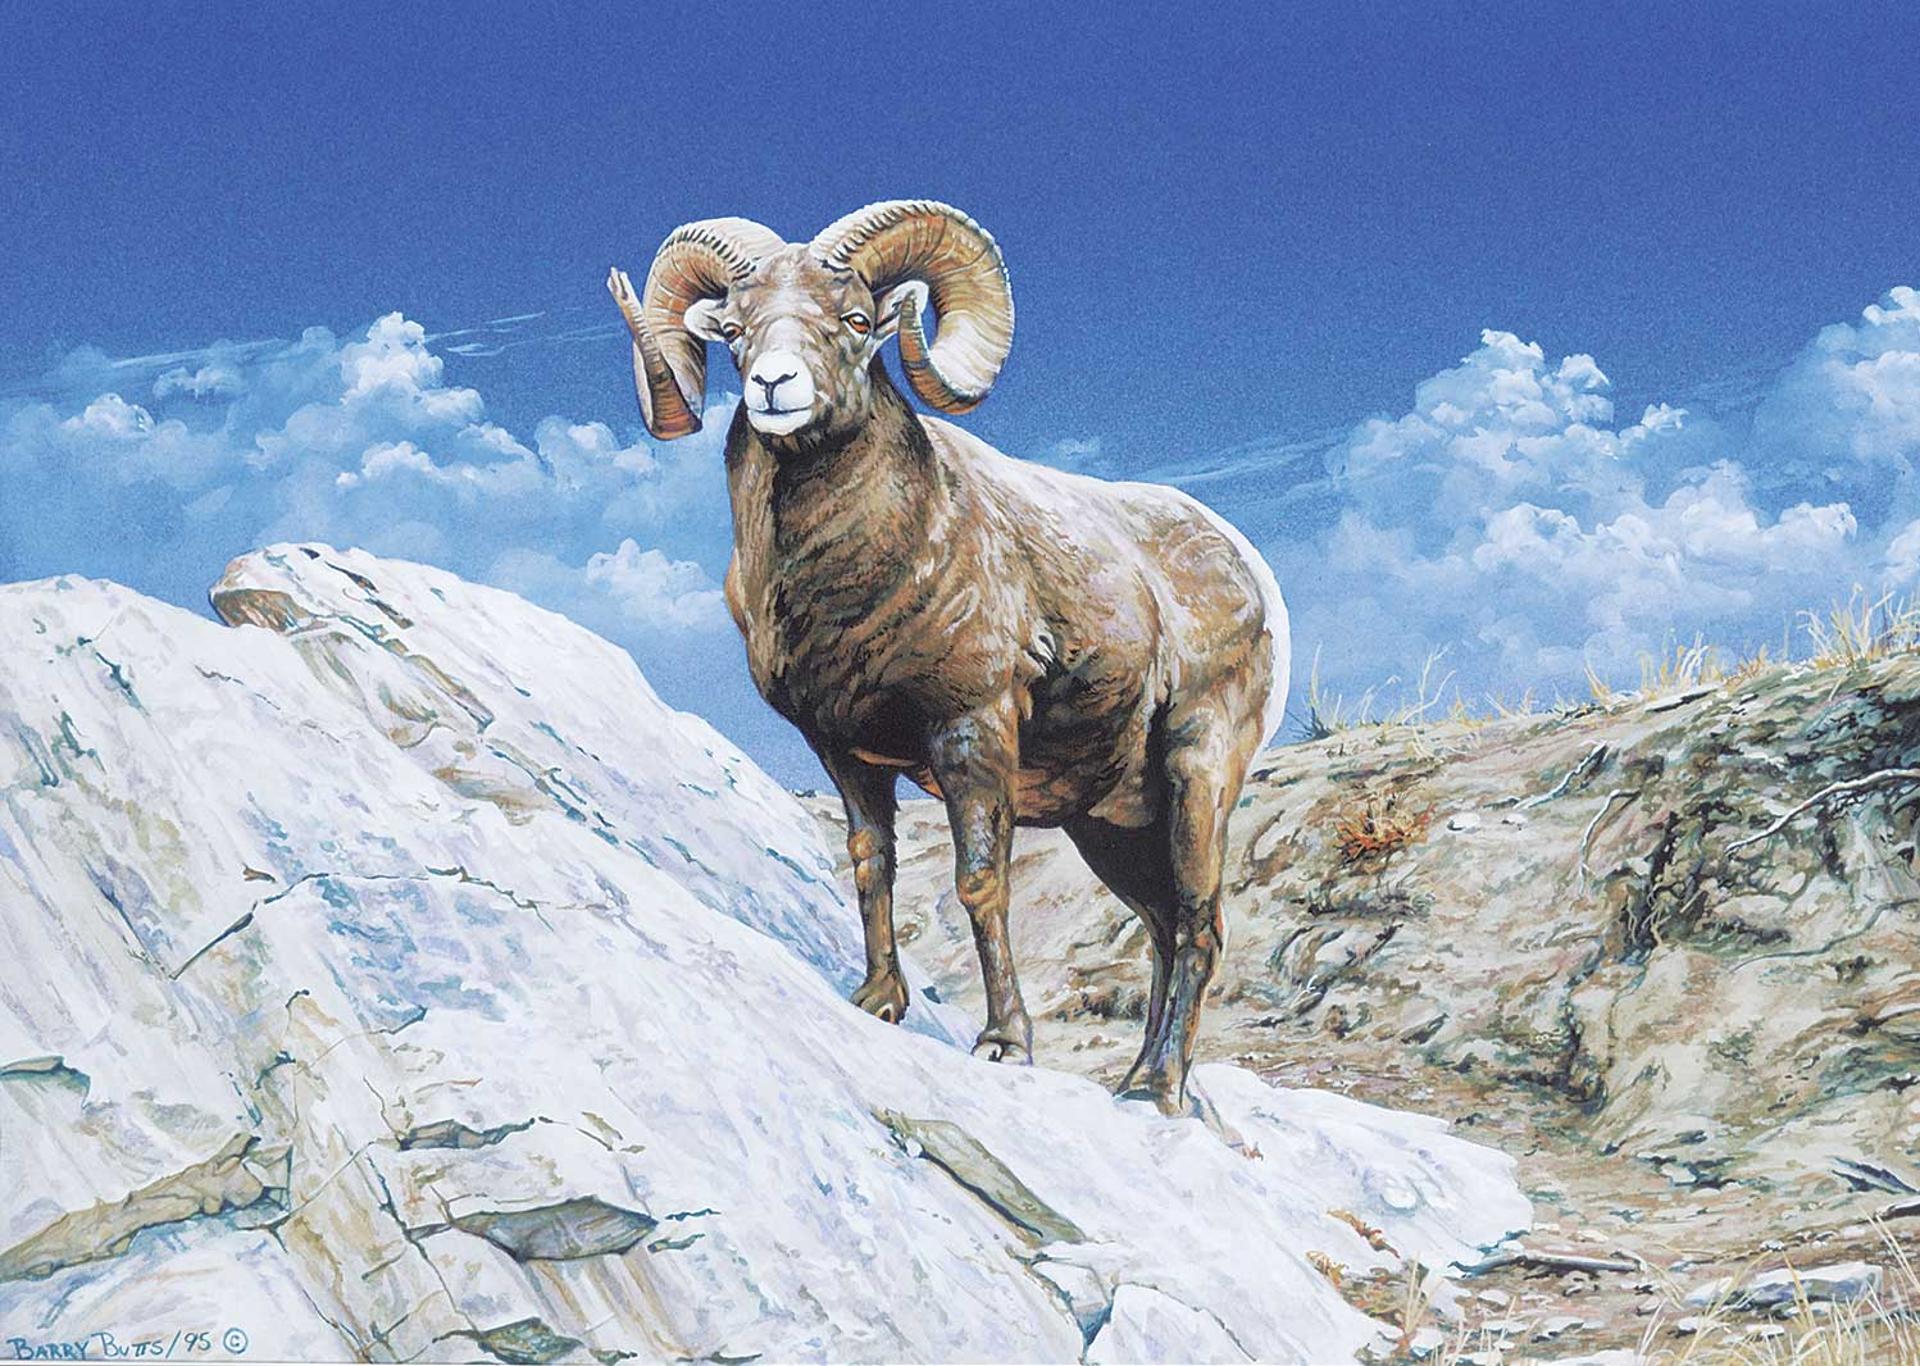 Barry Butts - Untitled - Lone Big Horn Sheep